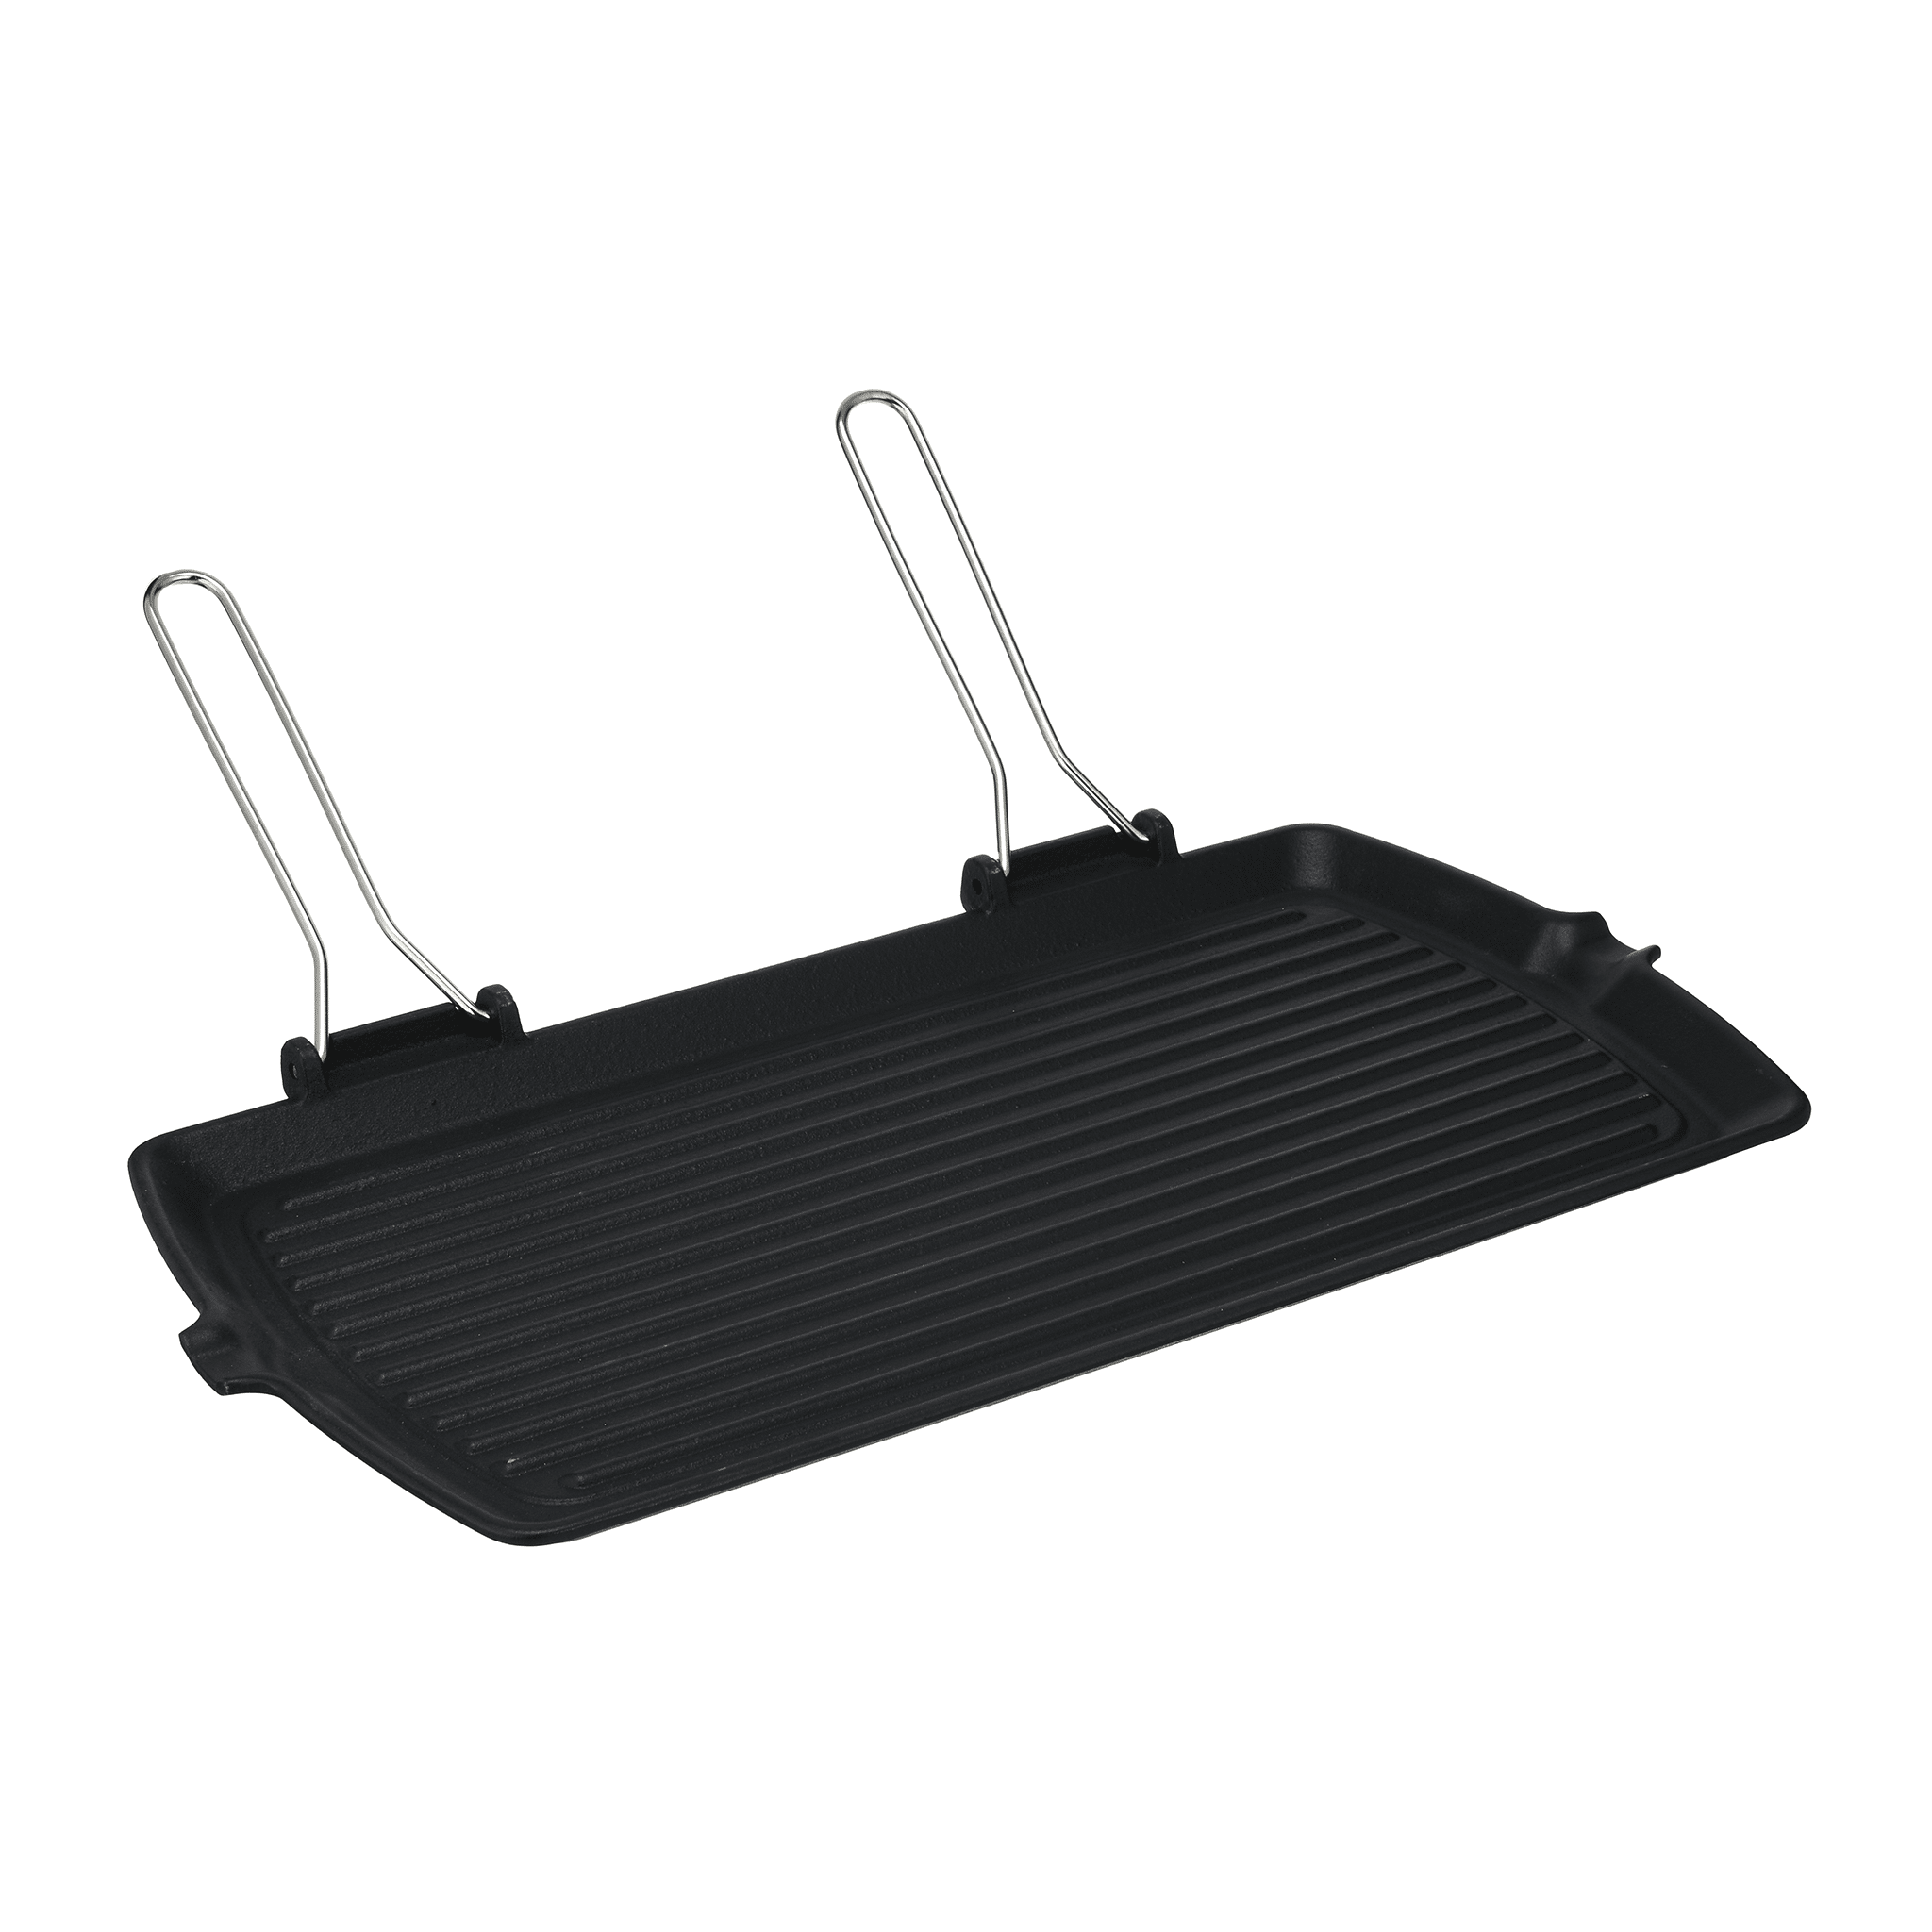 Risoli - Rectangular Grill with Foldable Handles - Black - 50cm - 44000417